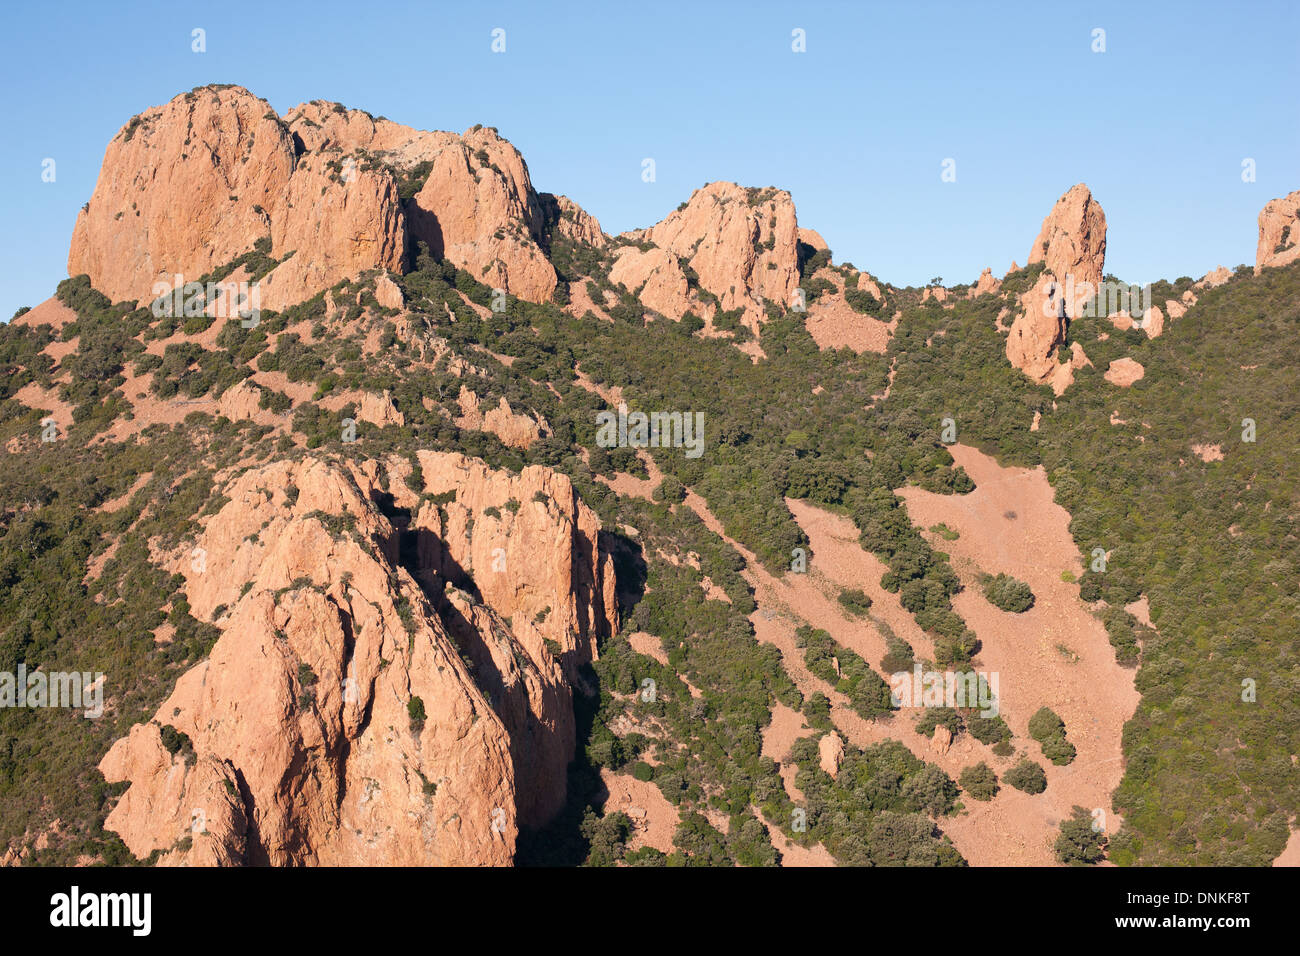 AERIAL VIEW. Buttes and pinnacles in a red rock of volcanic origins. Saint-Raphaël, Estérel Massif, Var, French Riviera, France. Stock Photo